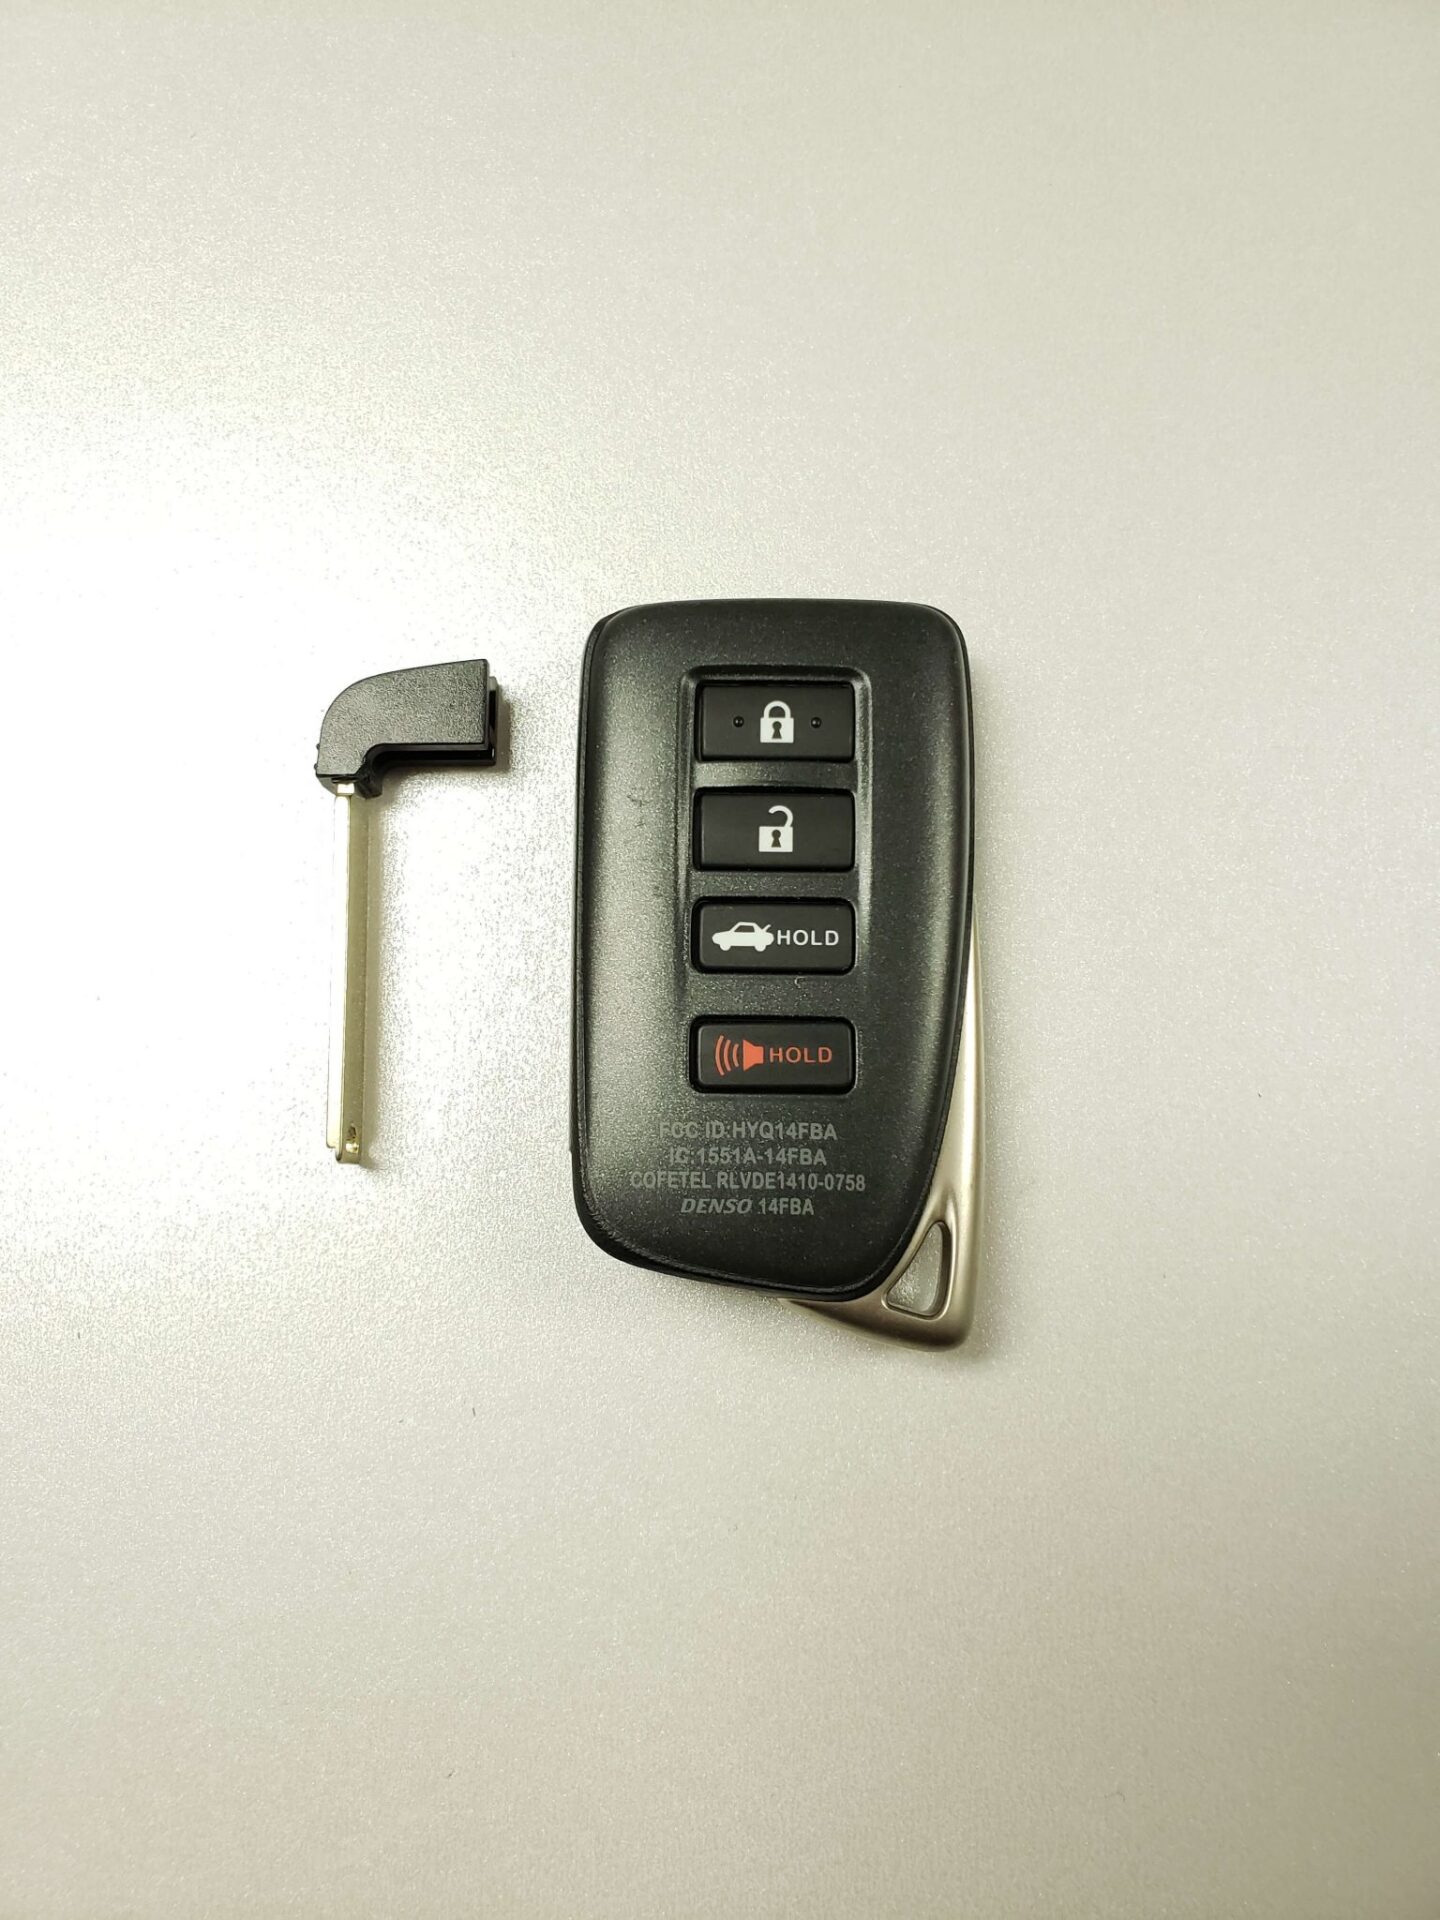 Lost Lexus Key Replacement - What To Do, Options, Costs, Tips & More